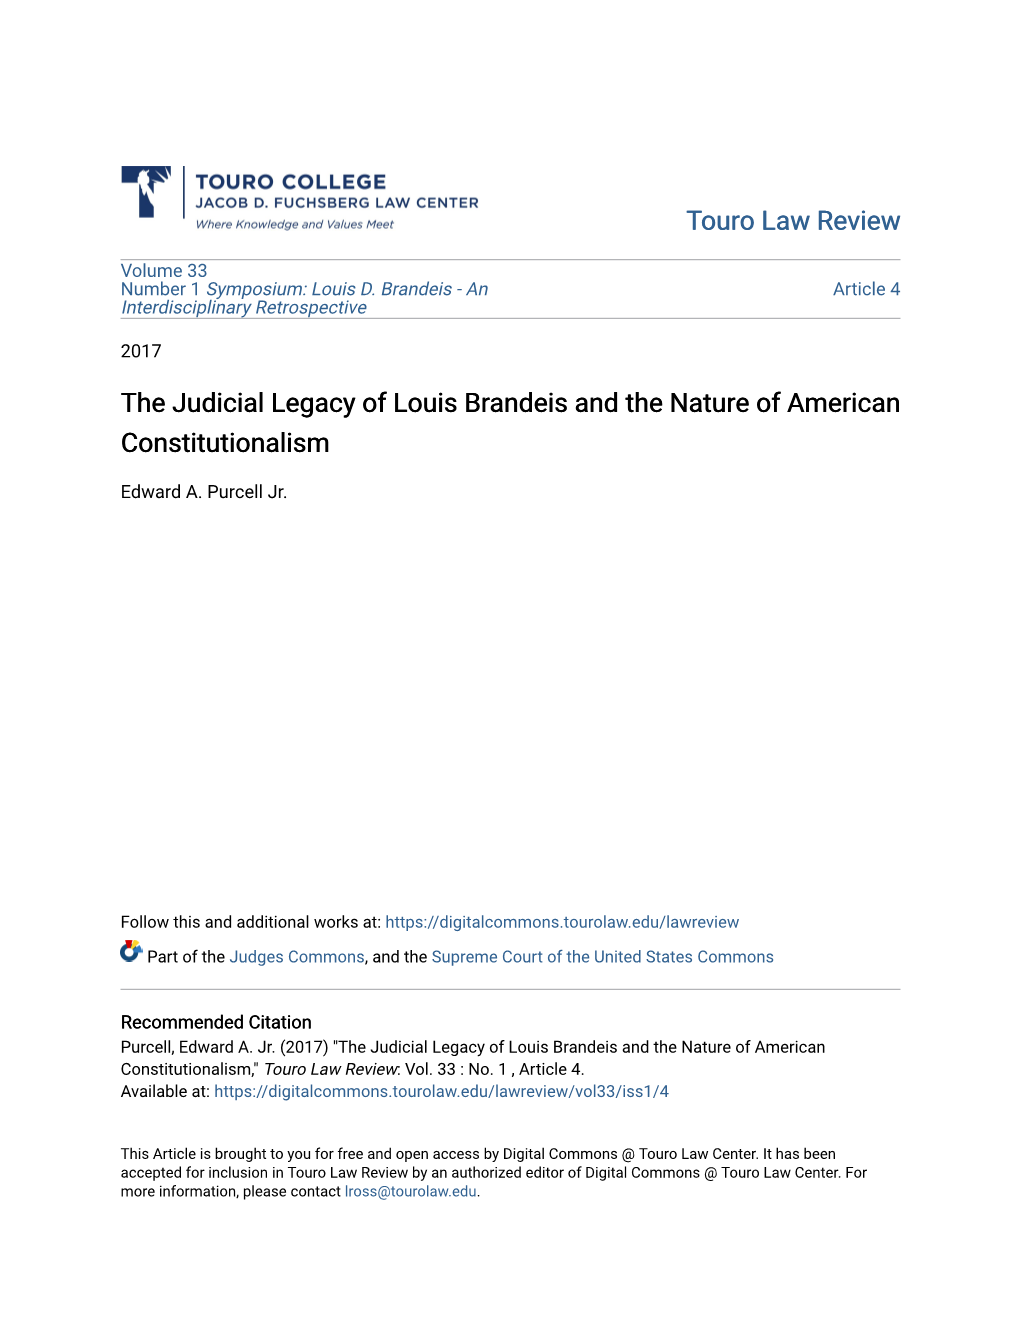 The Judicial Legacy of Louis Brandeis and the Nature of American Constitutionalism